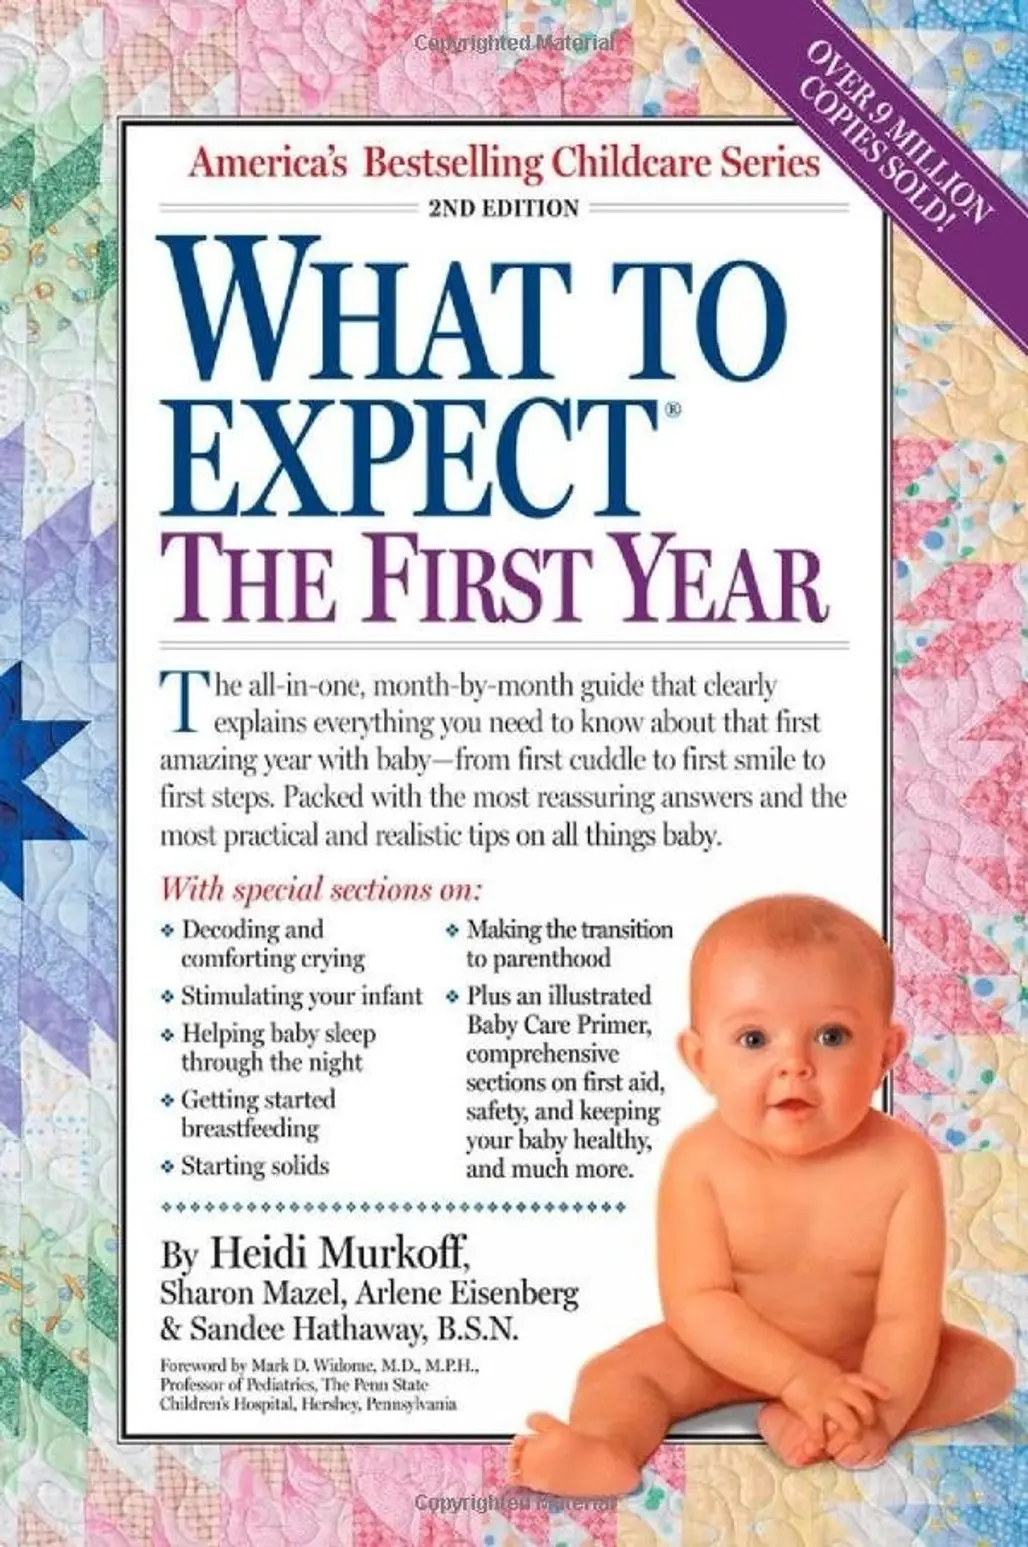 “What to Expect the First Year”